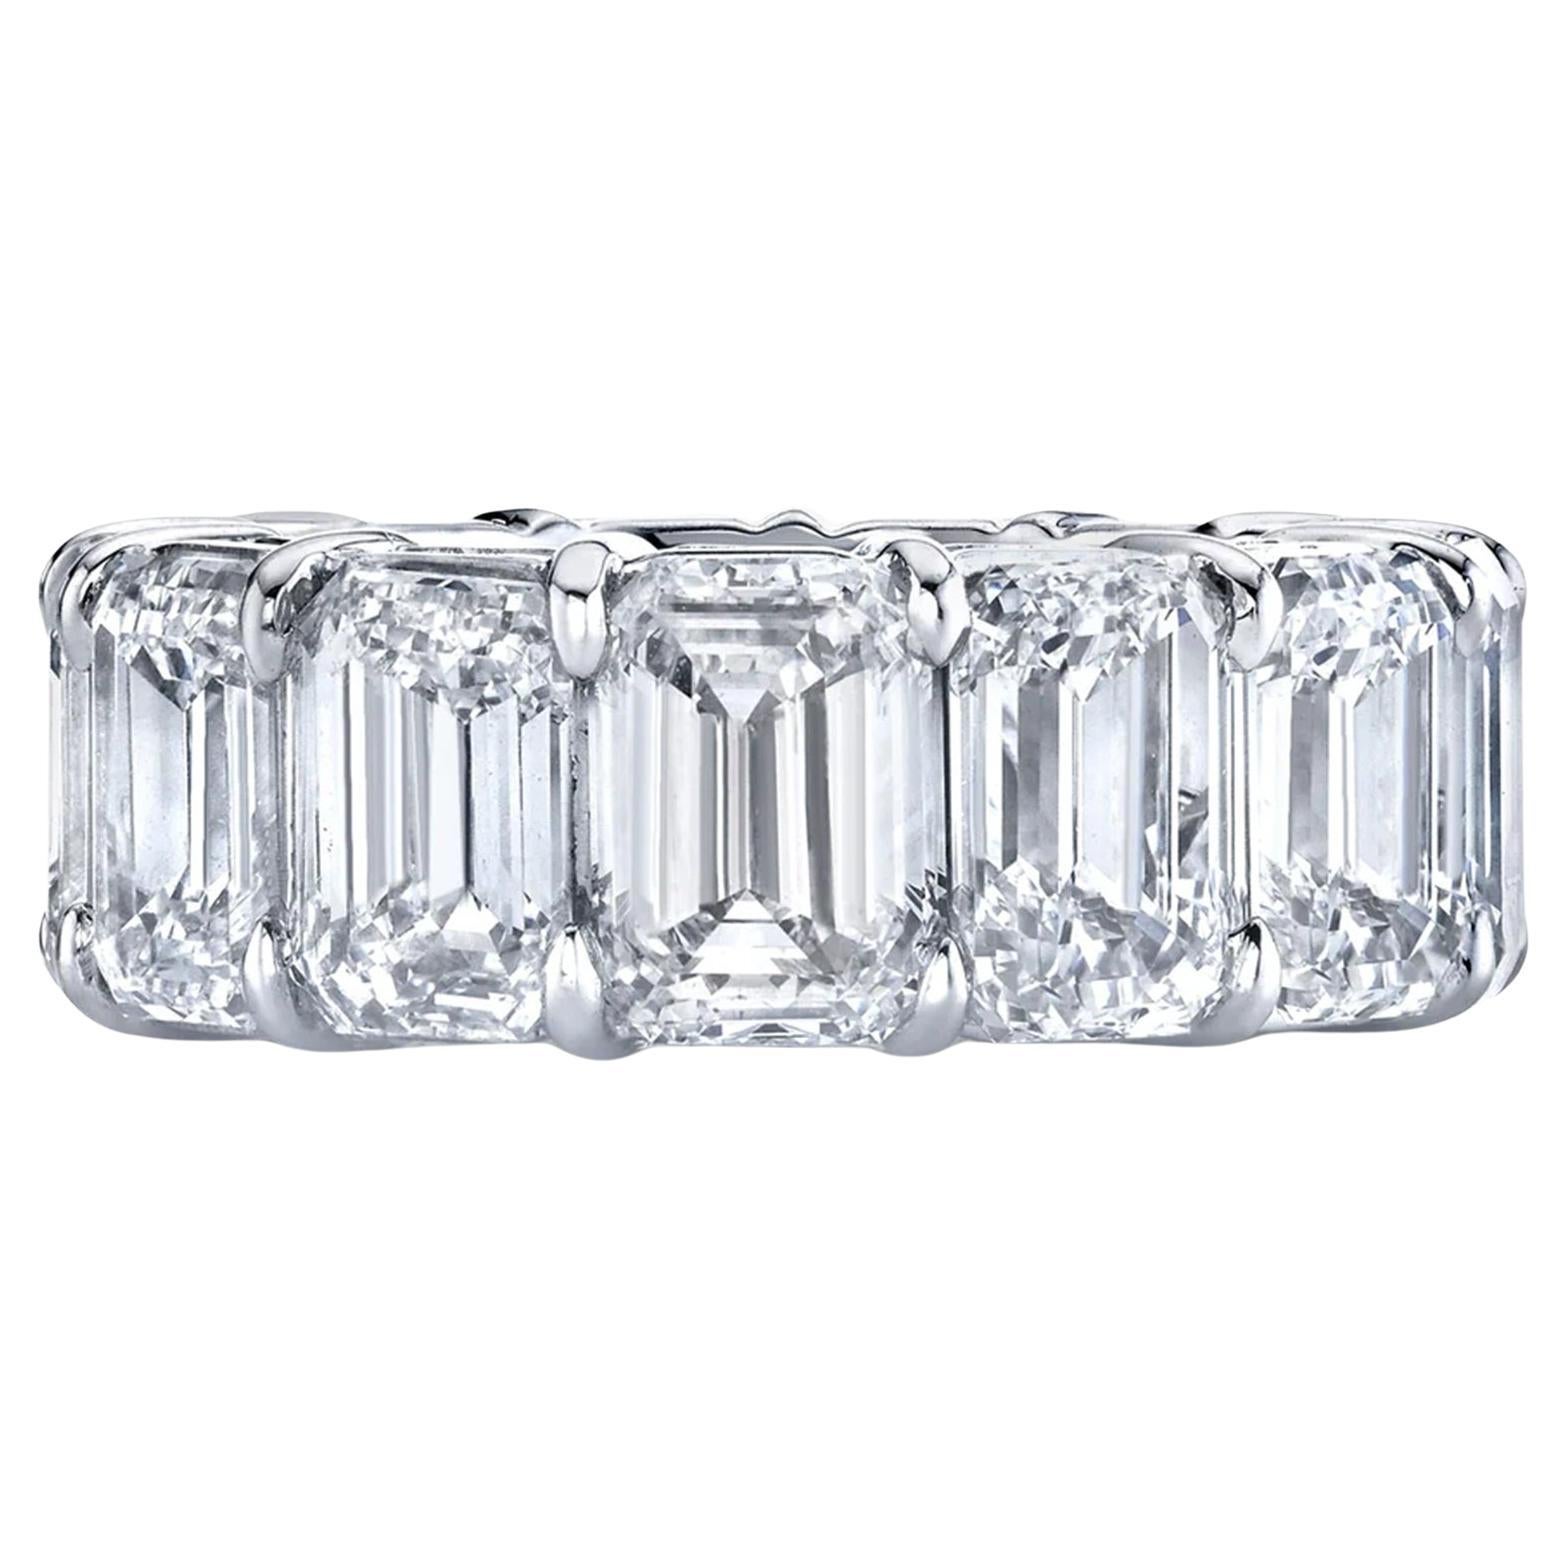 Discover elegance redefined with our Platinum Custom Handcrafted Shared Prong Low Base Eternity Band, adorned with 14 GIA Certified Emerald Cut Diamonds, totaling an impressive 14.25 carats. Each diamond, ranging from G to H color, boasts a